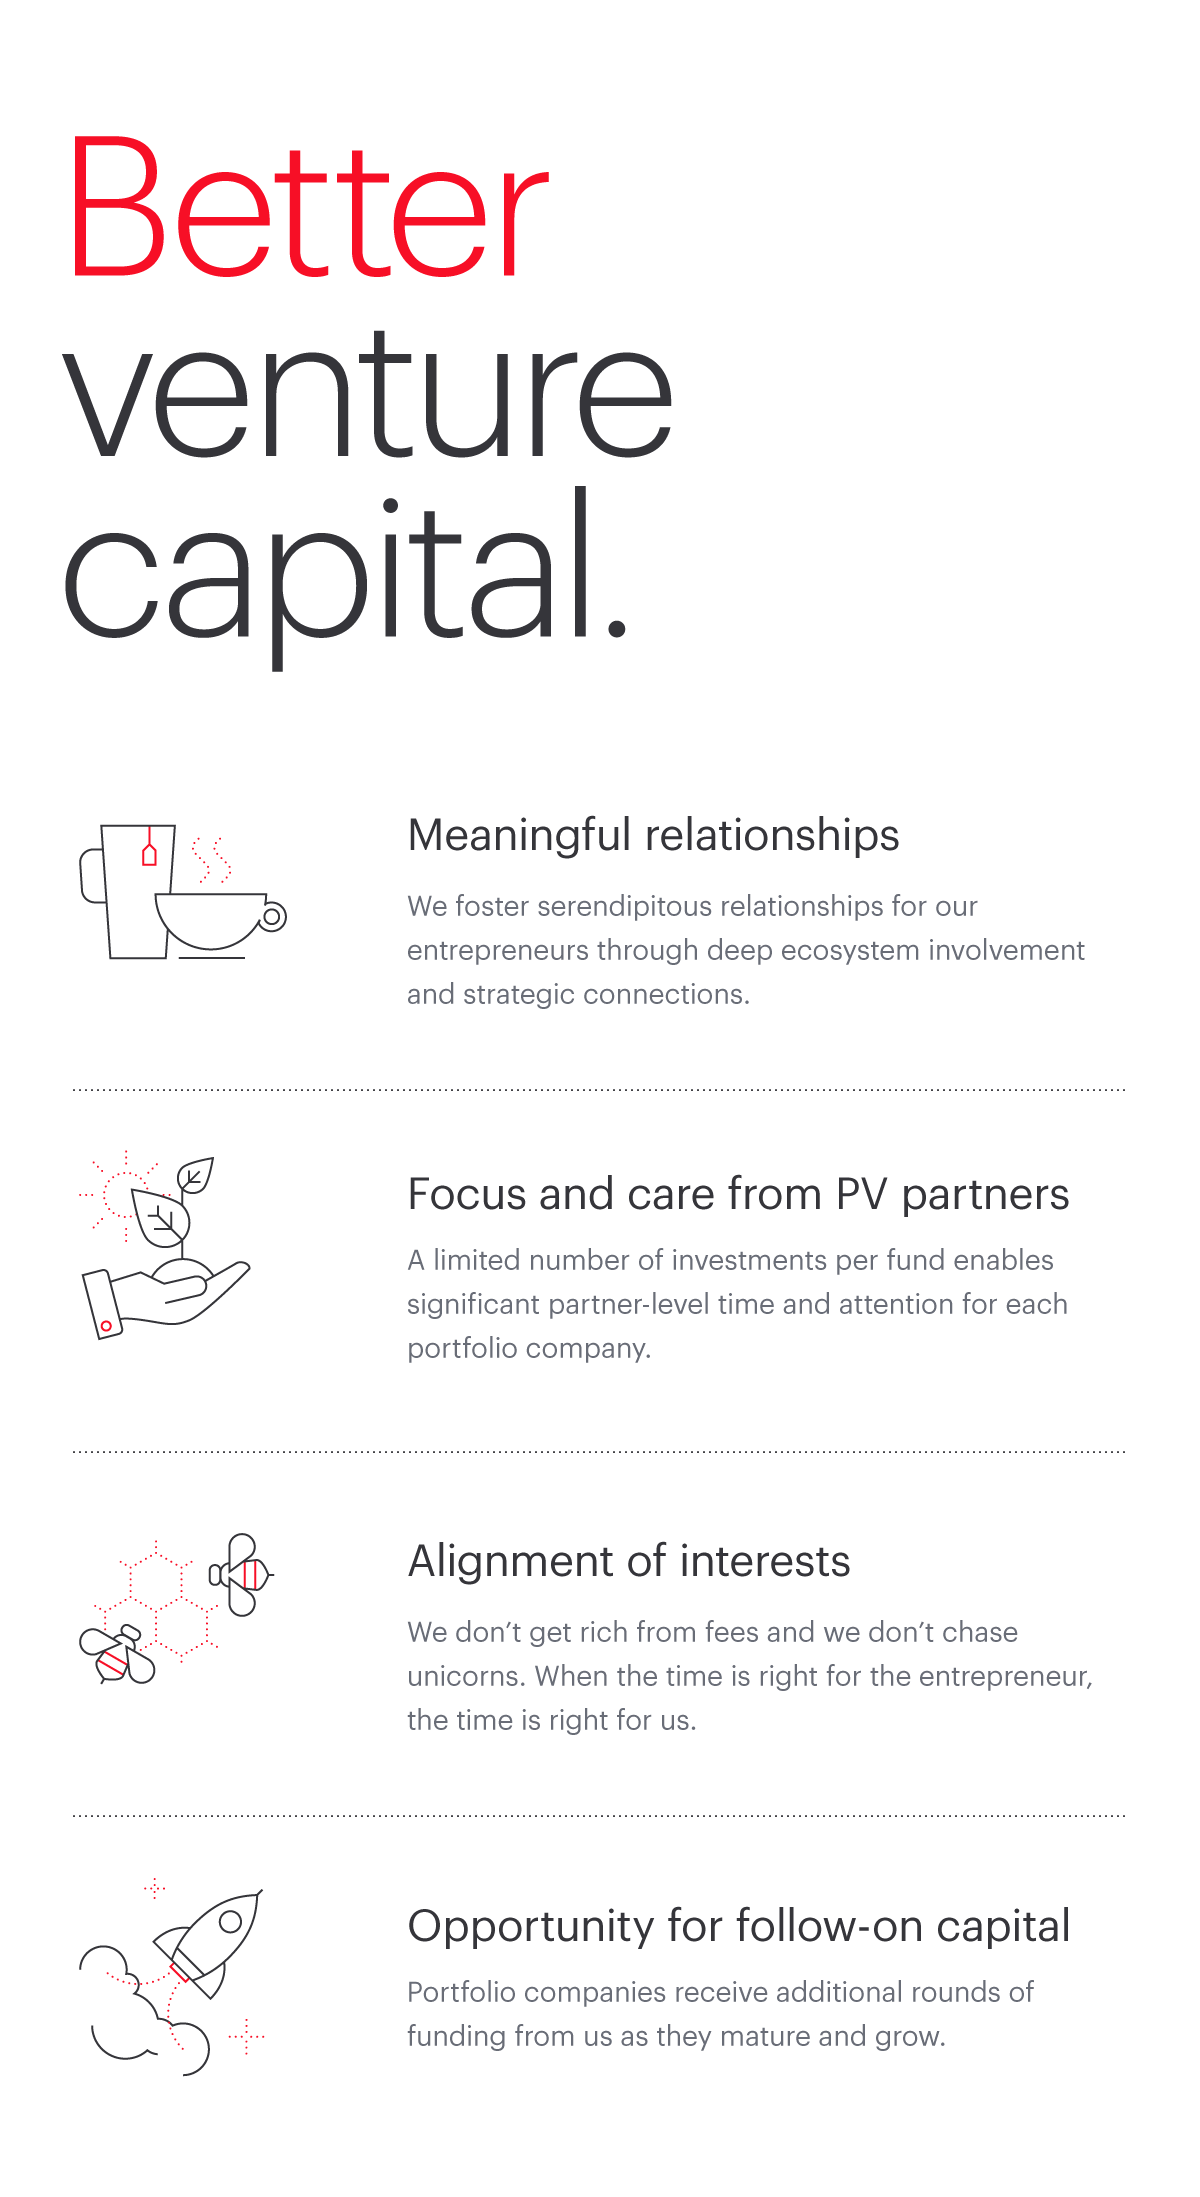 Overview of Plaza Venture’s value proposition paired with custom icon design by Studio Function